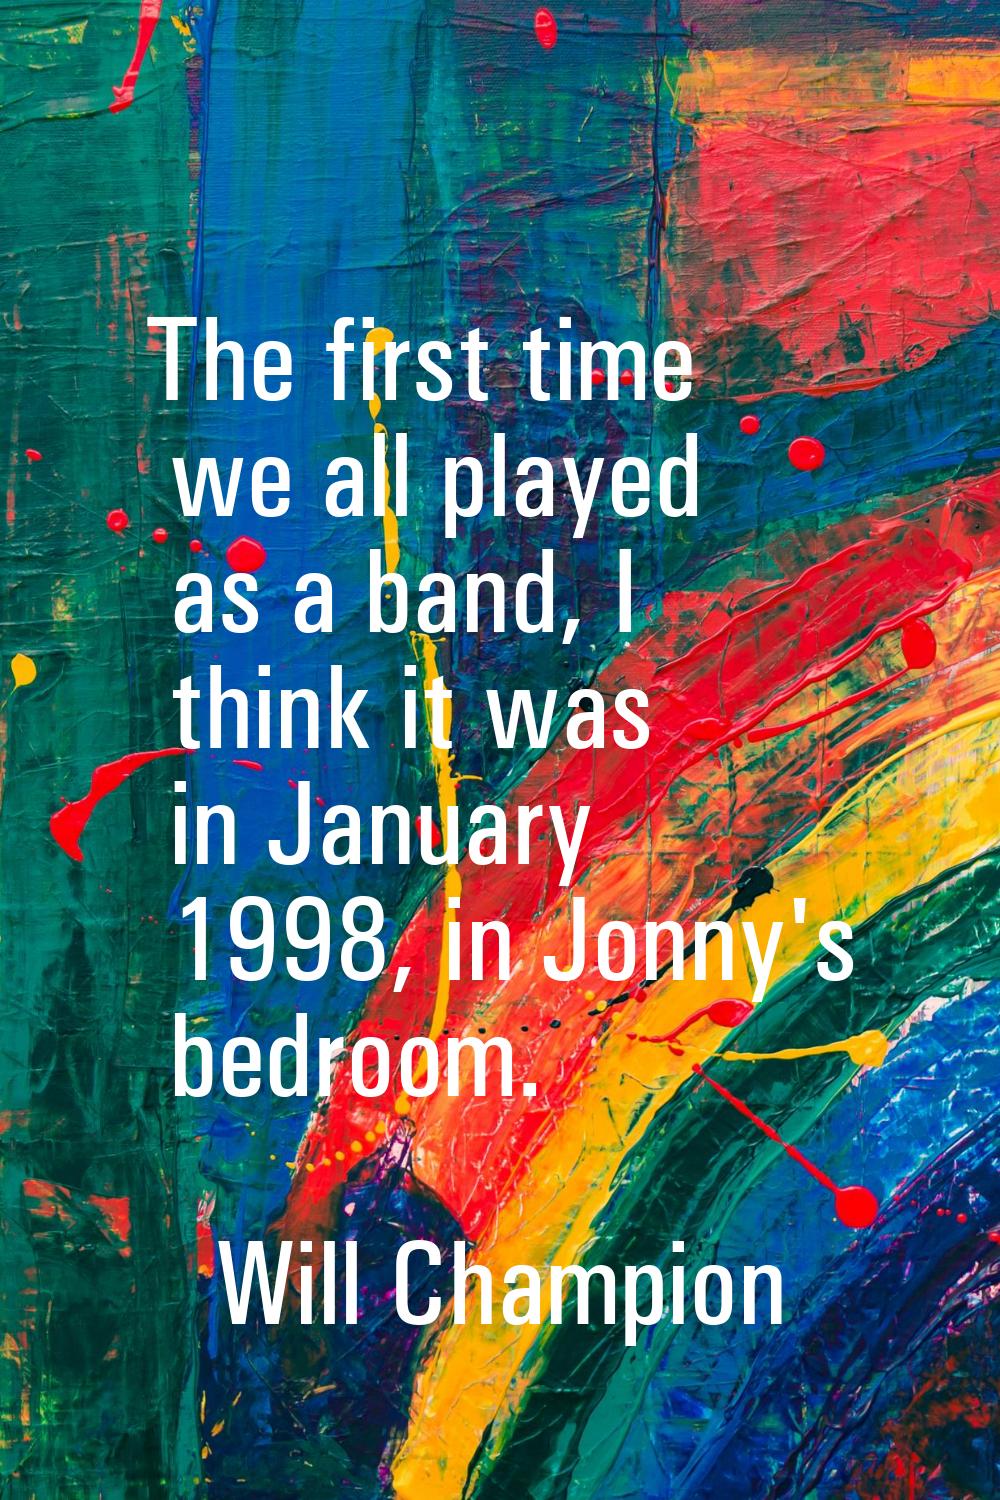 The first time we all played as a band, I think it was in January 1998, in Jonny's bedroom.